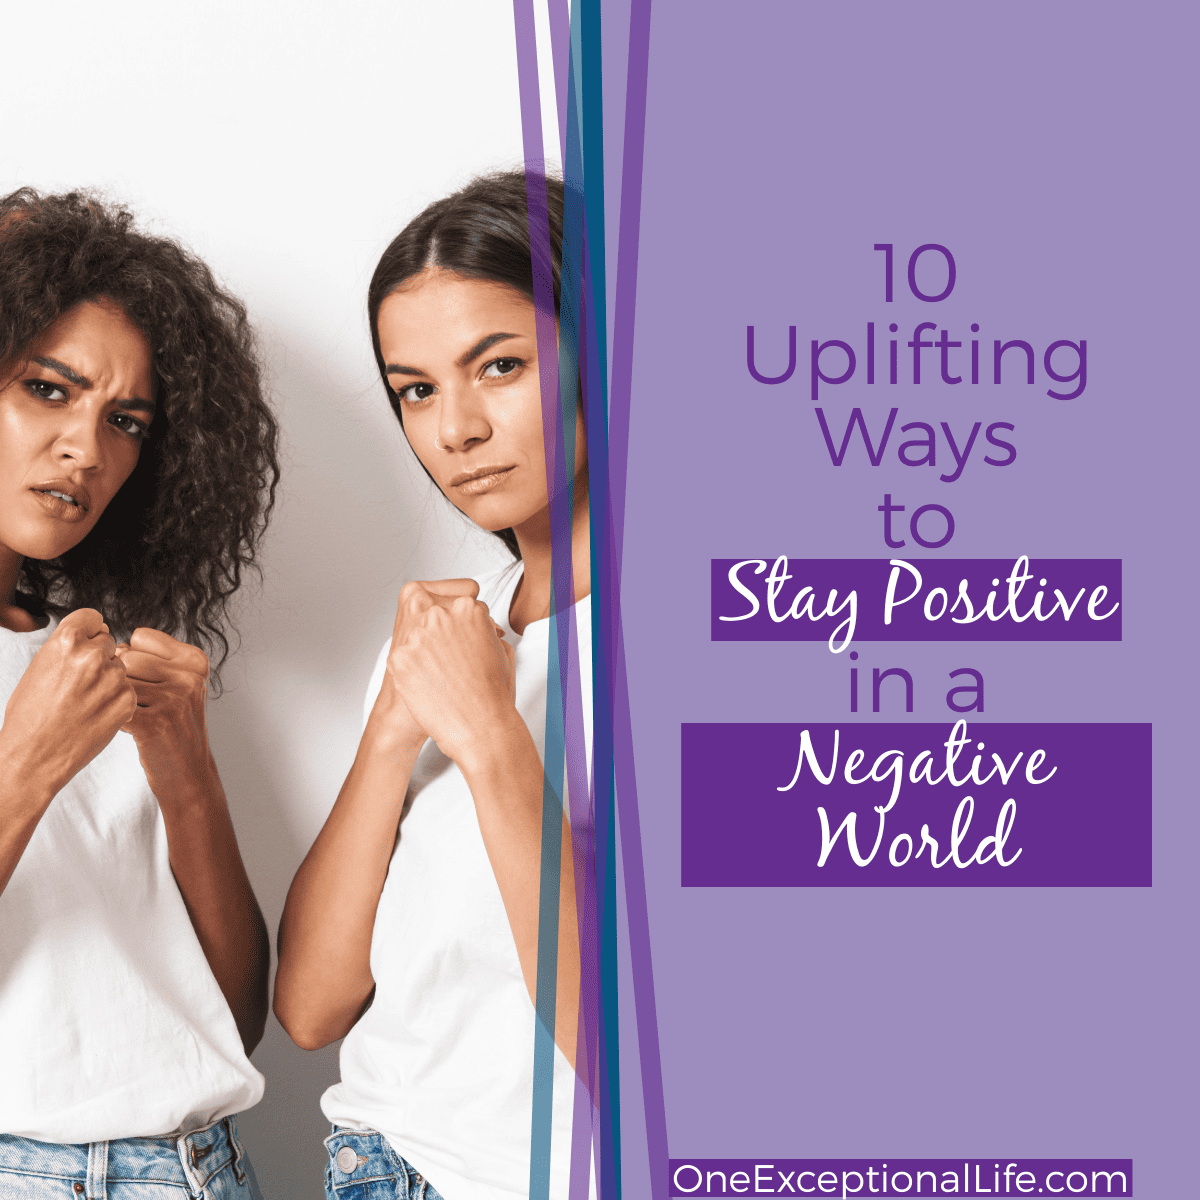 10 Uplifting Ways for How to Stay Positive in a Negative World